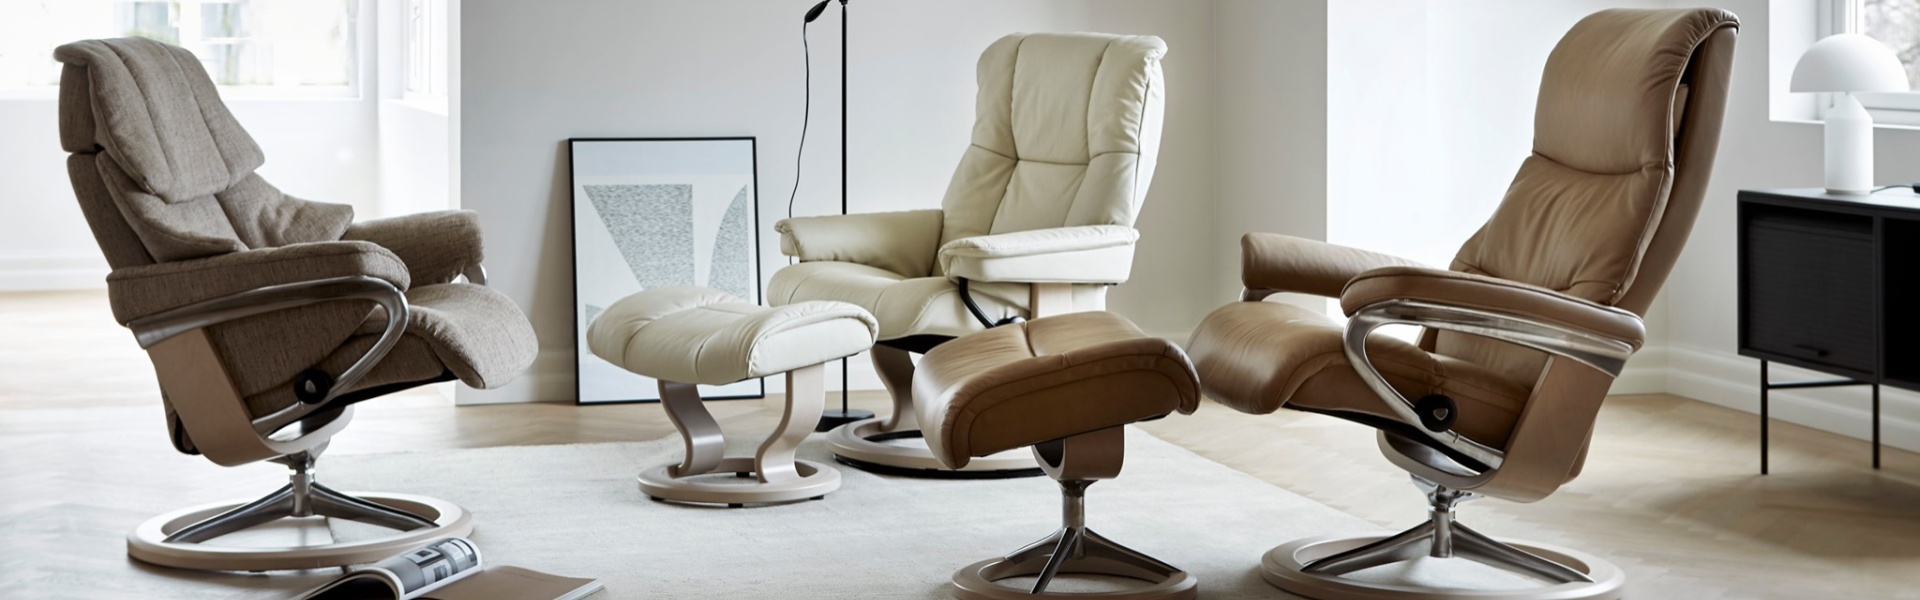 Explore our range of recliner chairs